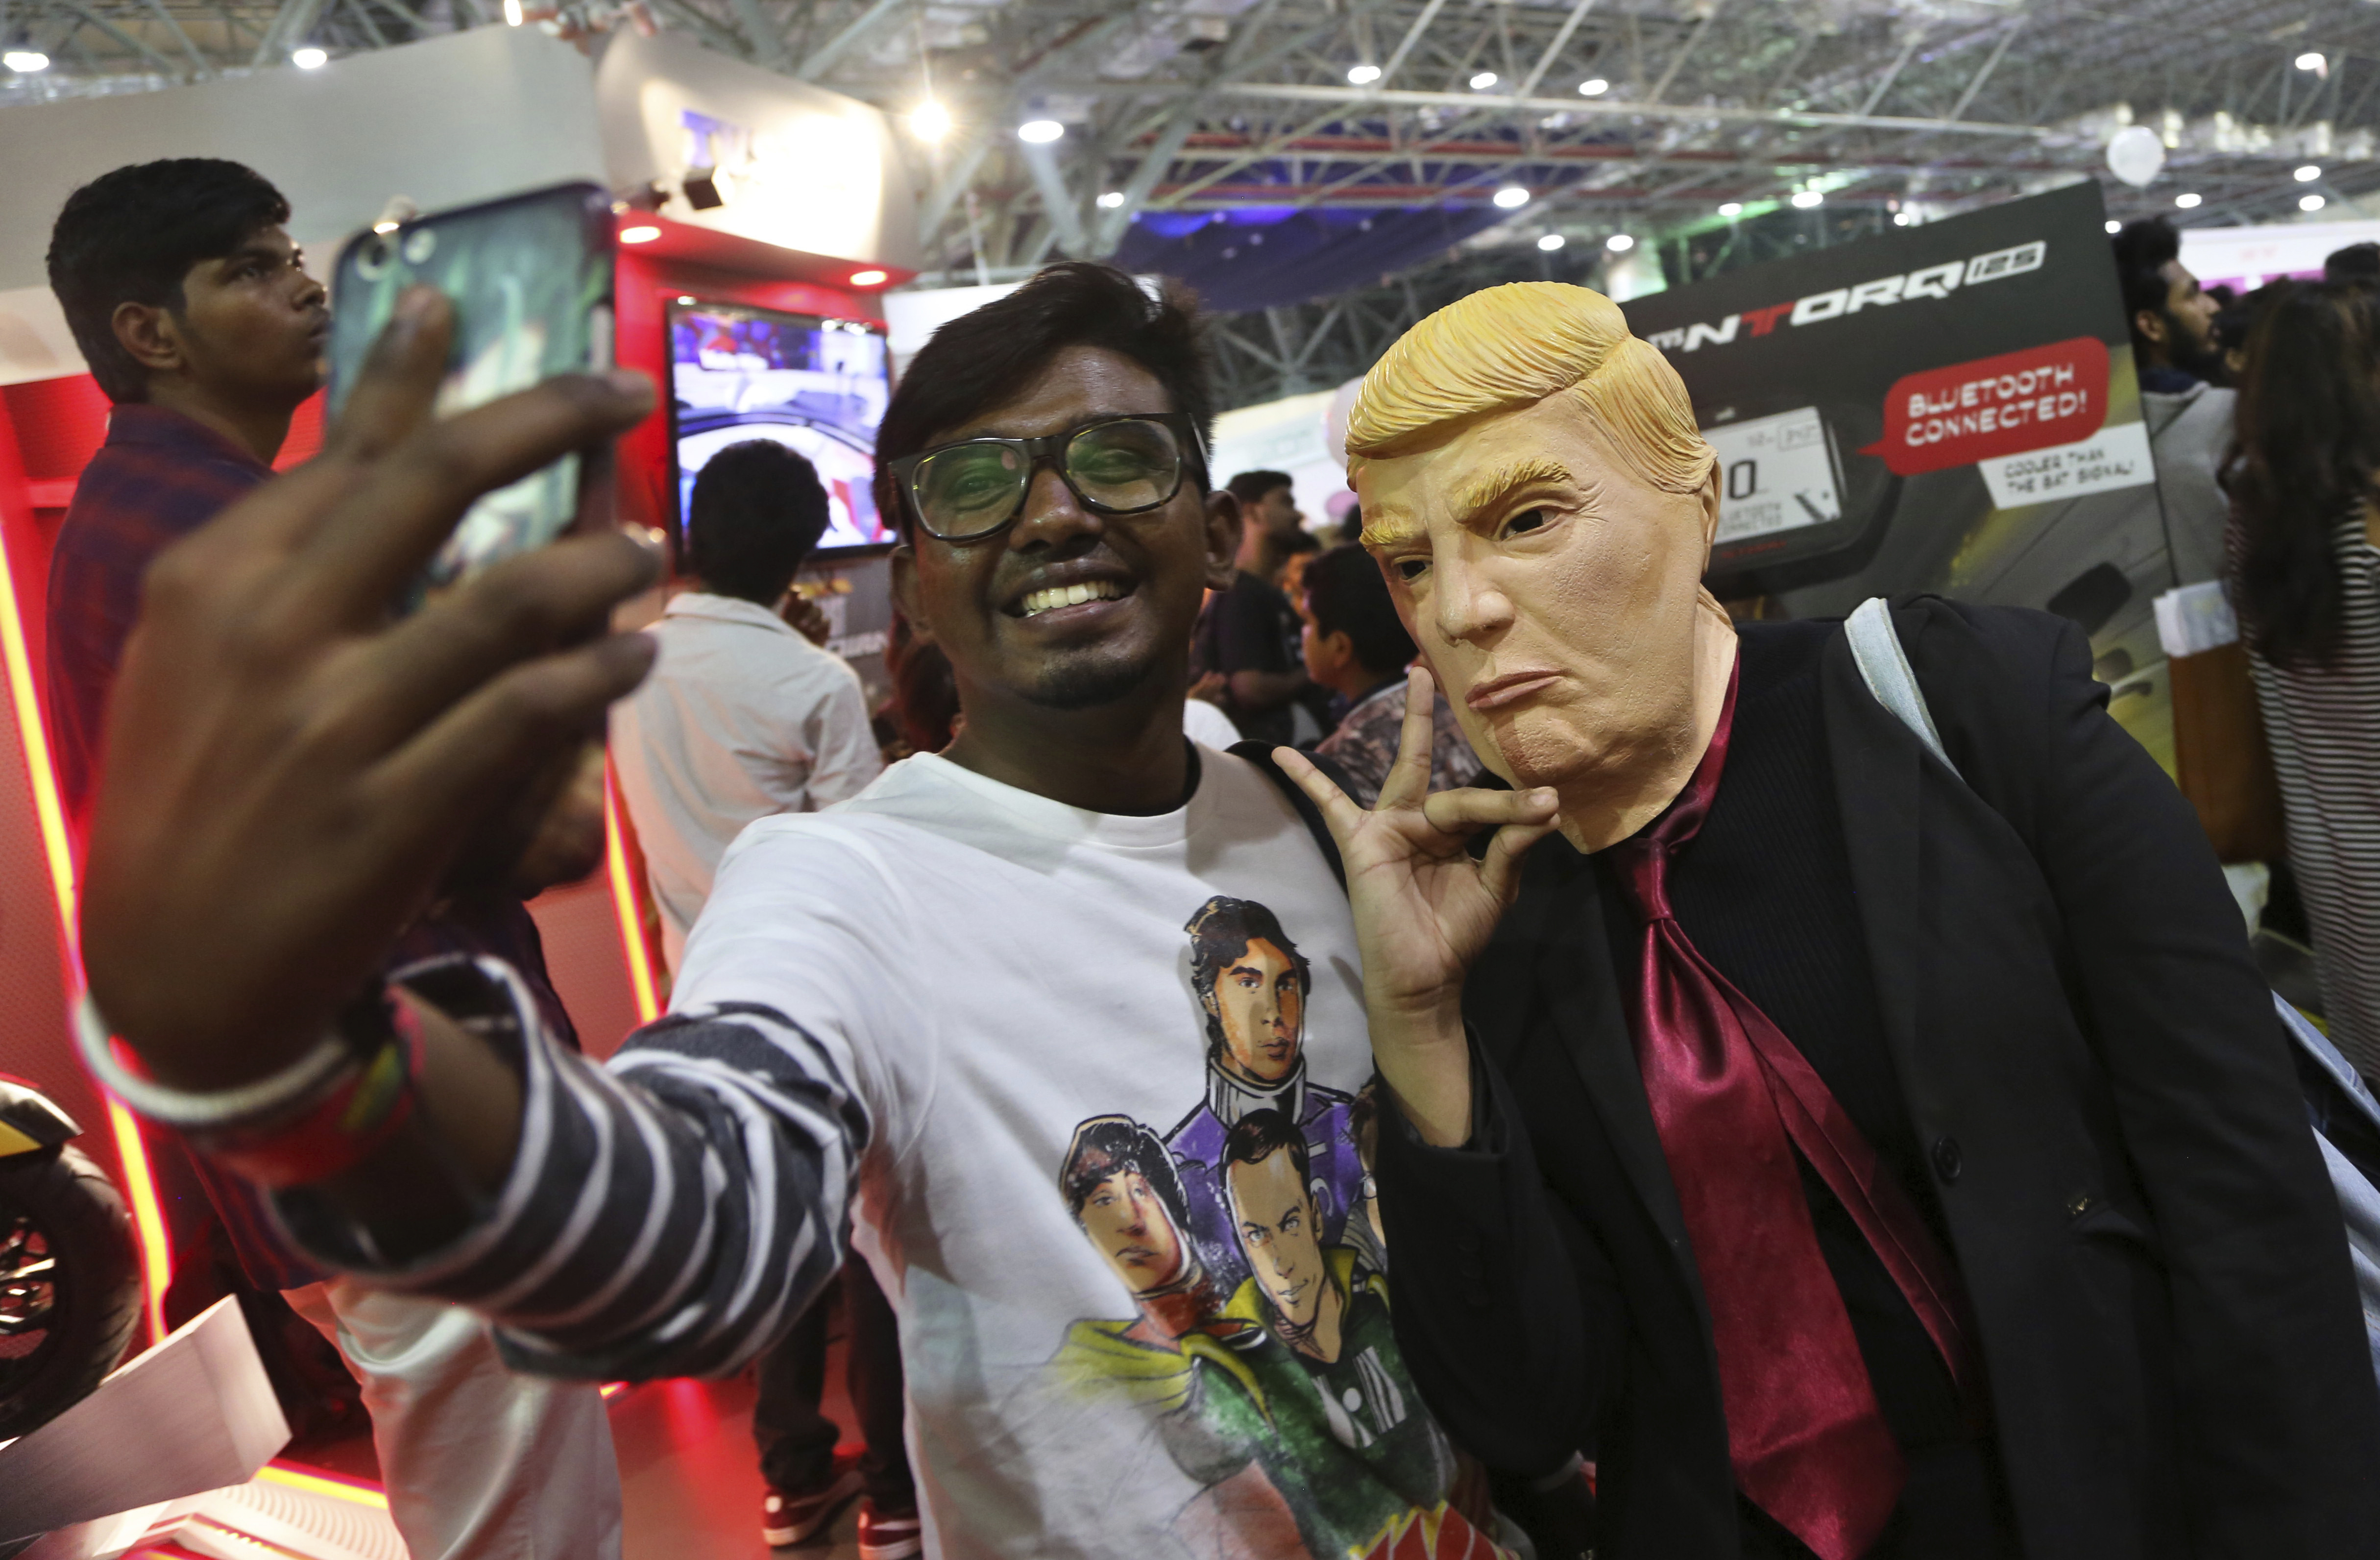 A man takes a selfie with a girl dressed as U.S. President Donald Trump at the Bengaluru Comic Con in Bangalore - AP